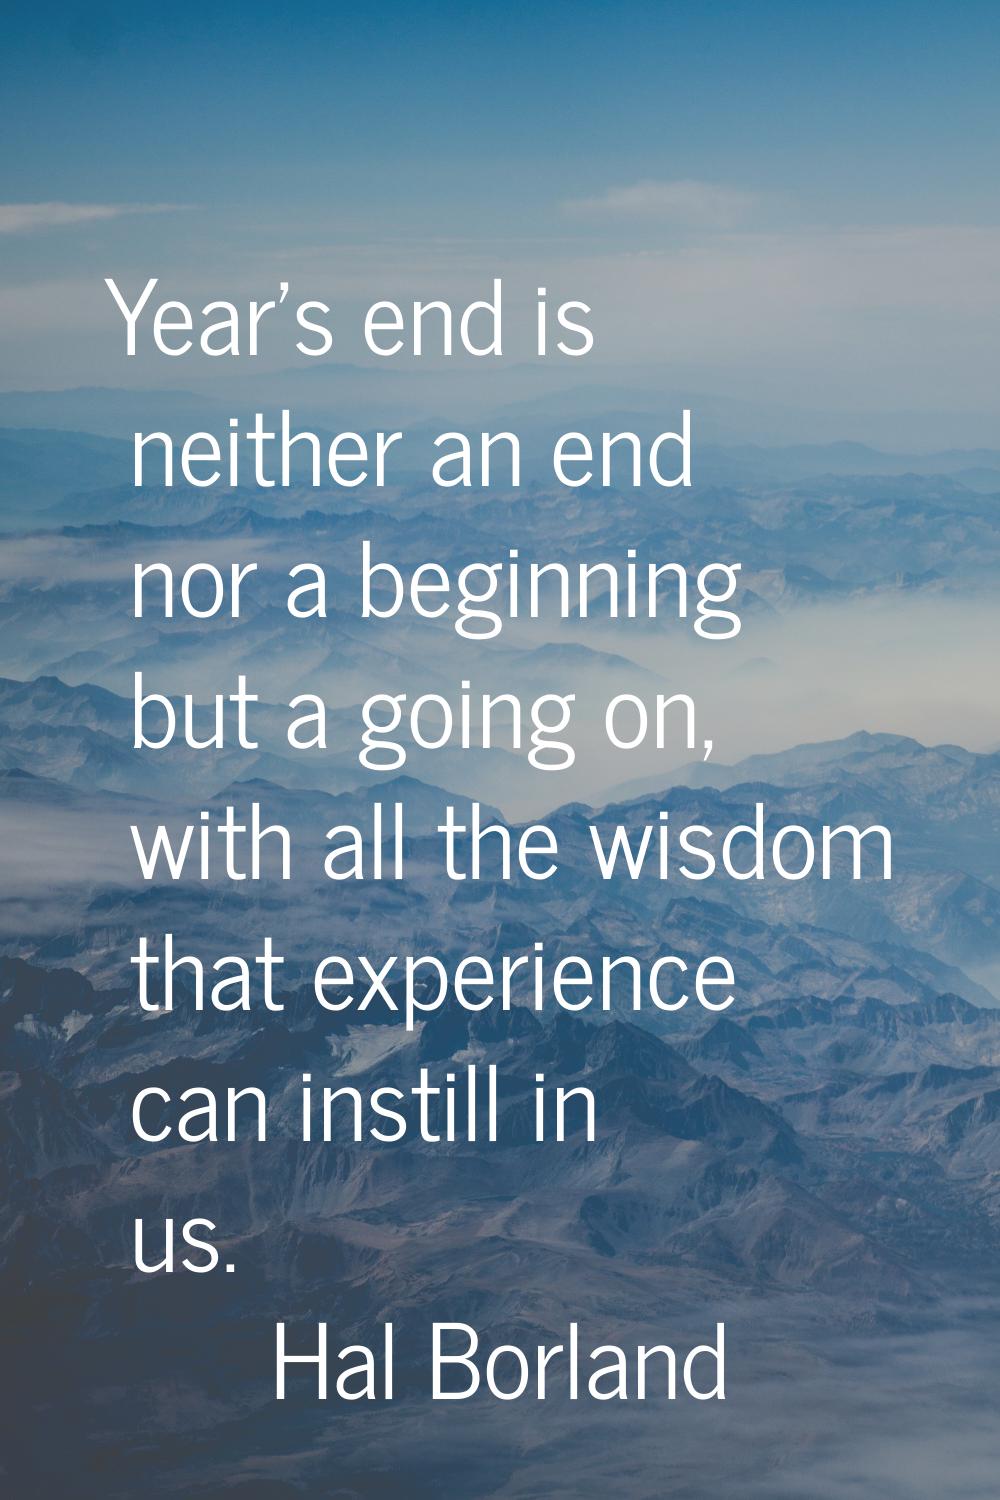 Year's end is neither an end nor a beginning but a going on, with all the wisdom that experience ca